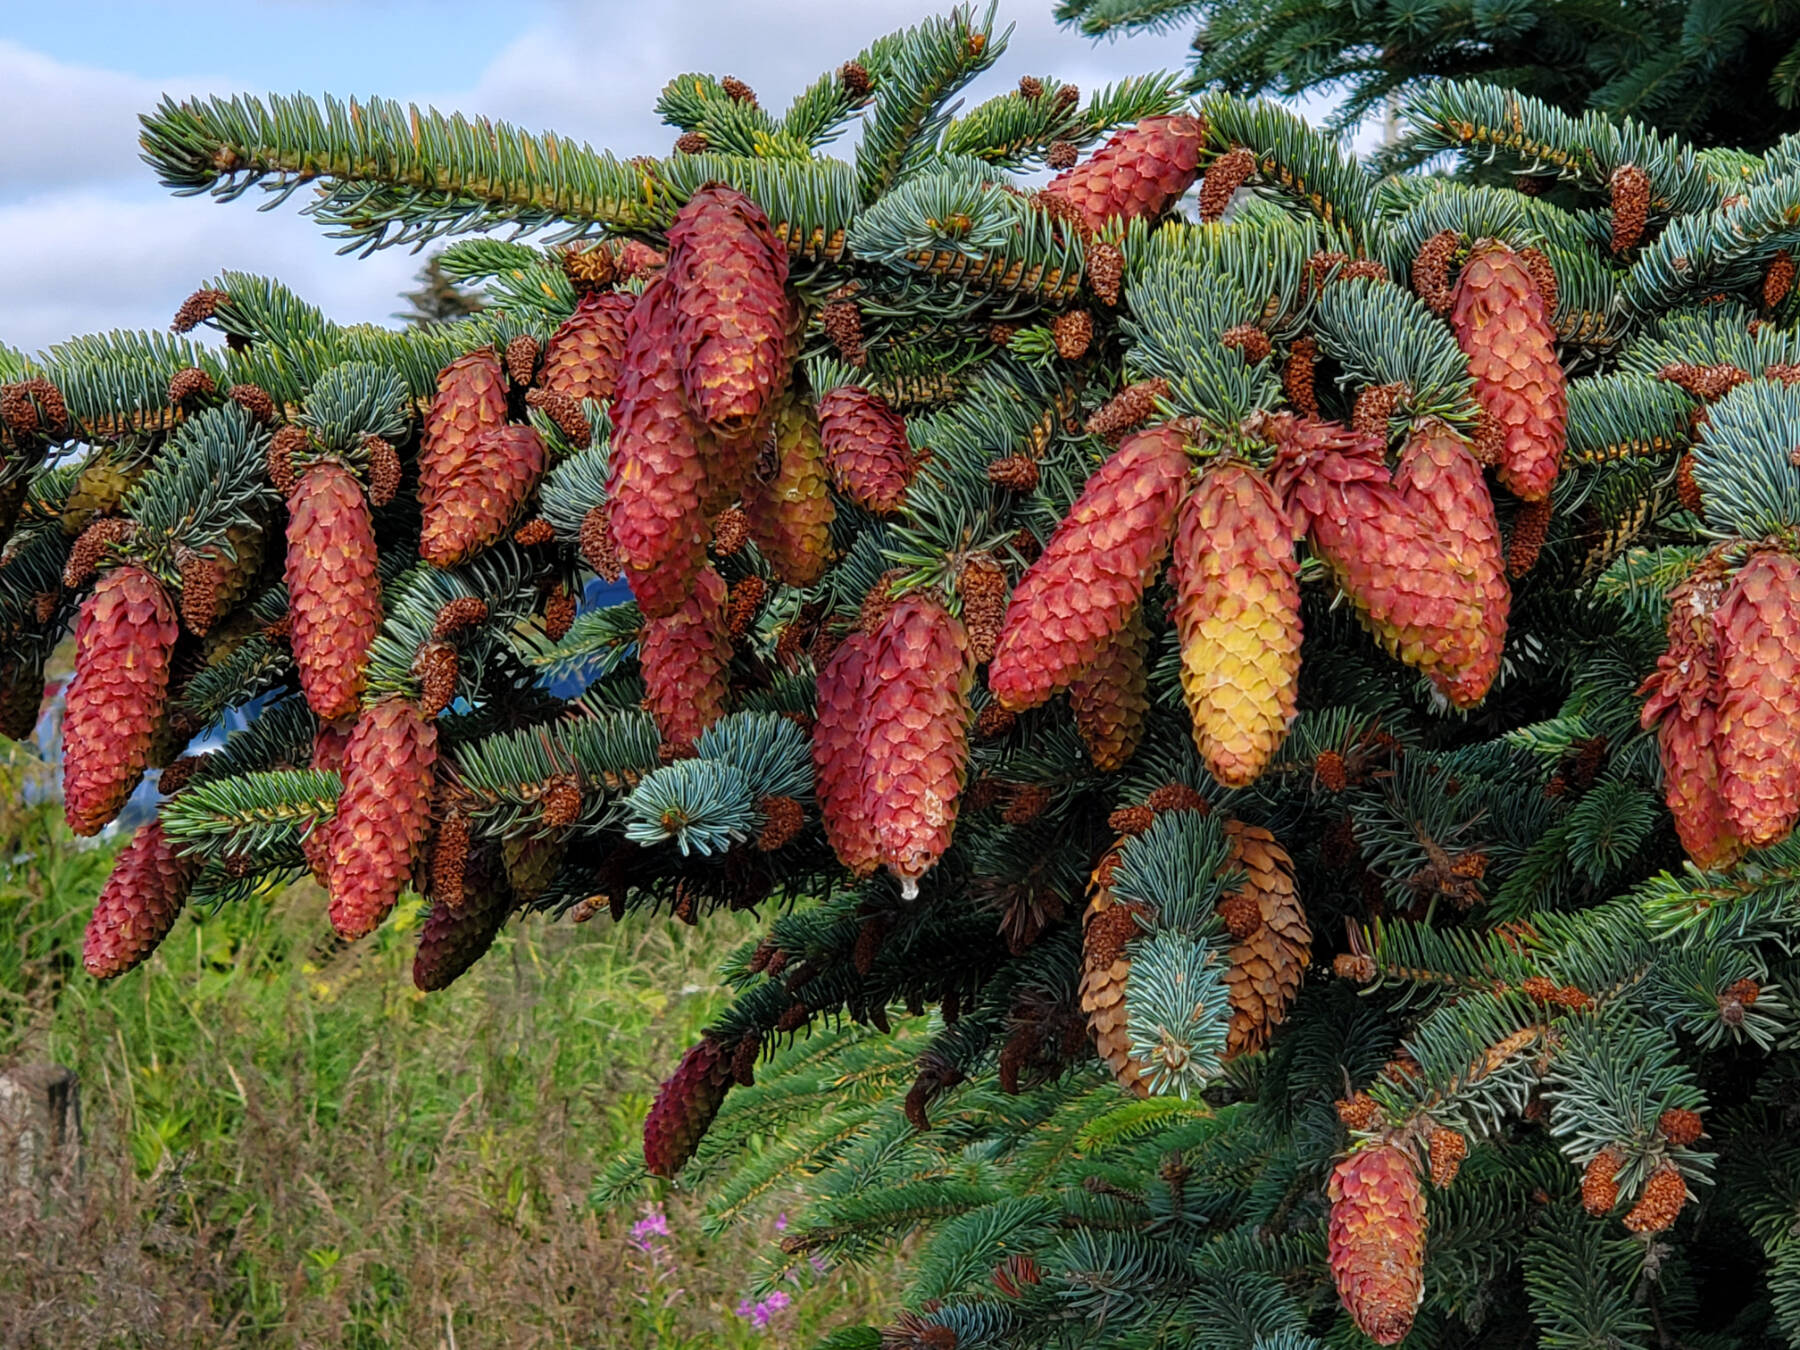 Young seed cones on a spruce tree bordering the Beluga Slough boardwalk are a vibrant reddish color on Friday, Aug. 18, 2023 in Homer, Alaska. (Delcenia Cosman/Homer News)